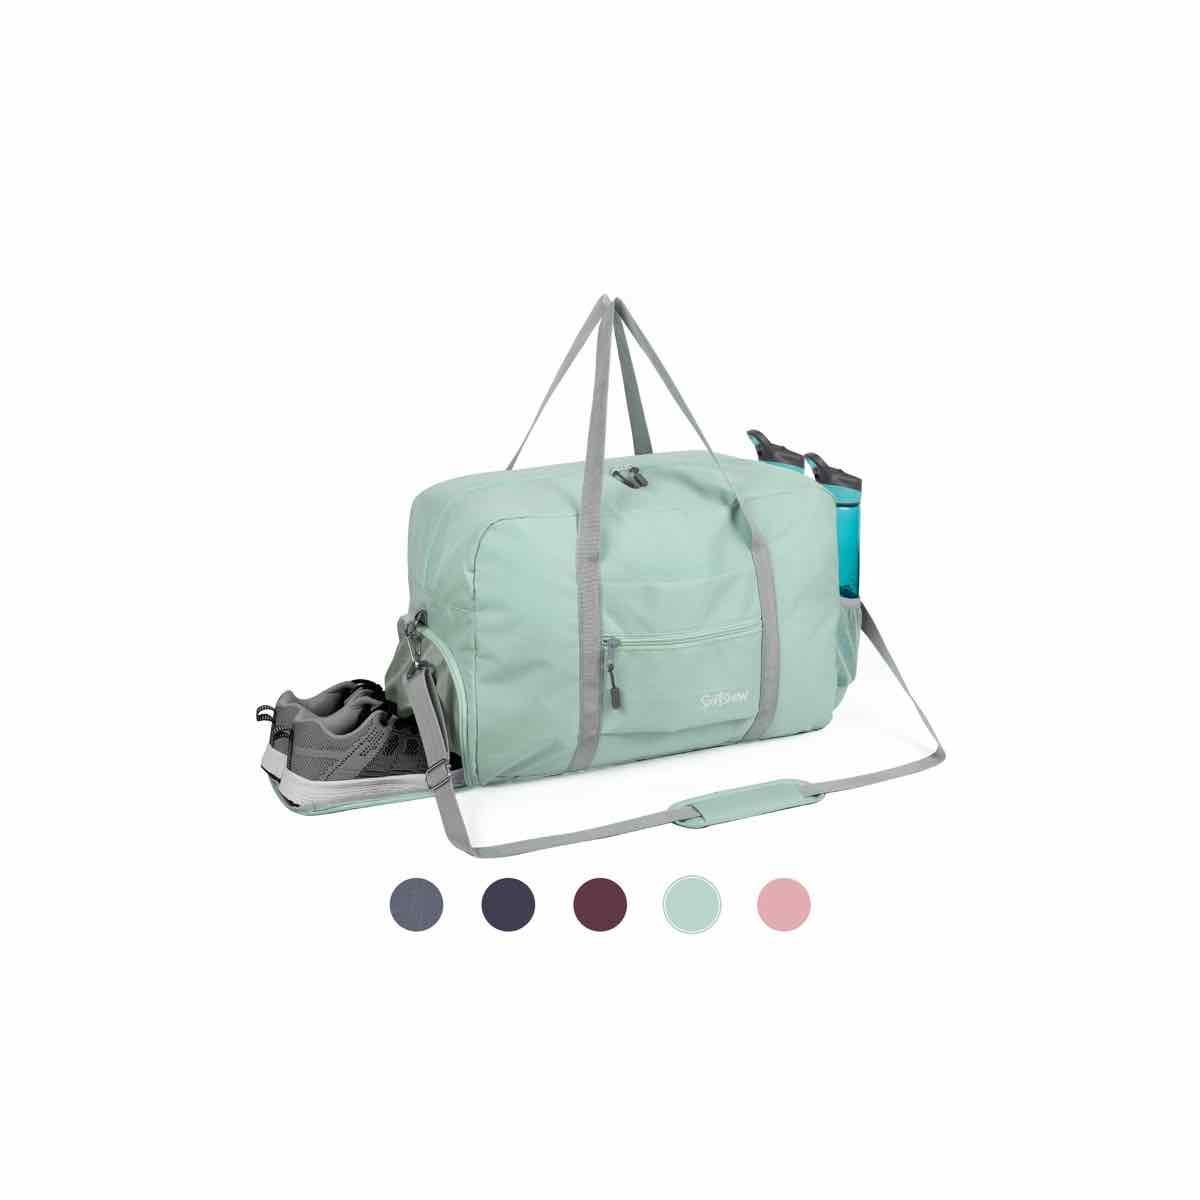 Travel Gym Bag Bear And Moon Casual Fashion Bag With Shoes Compartment Foldable Duffle Bag For Men Women